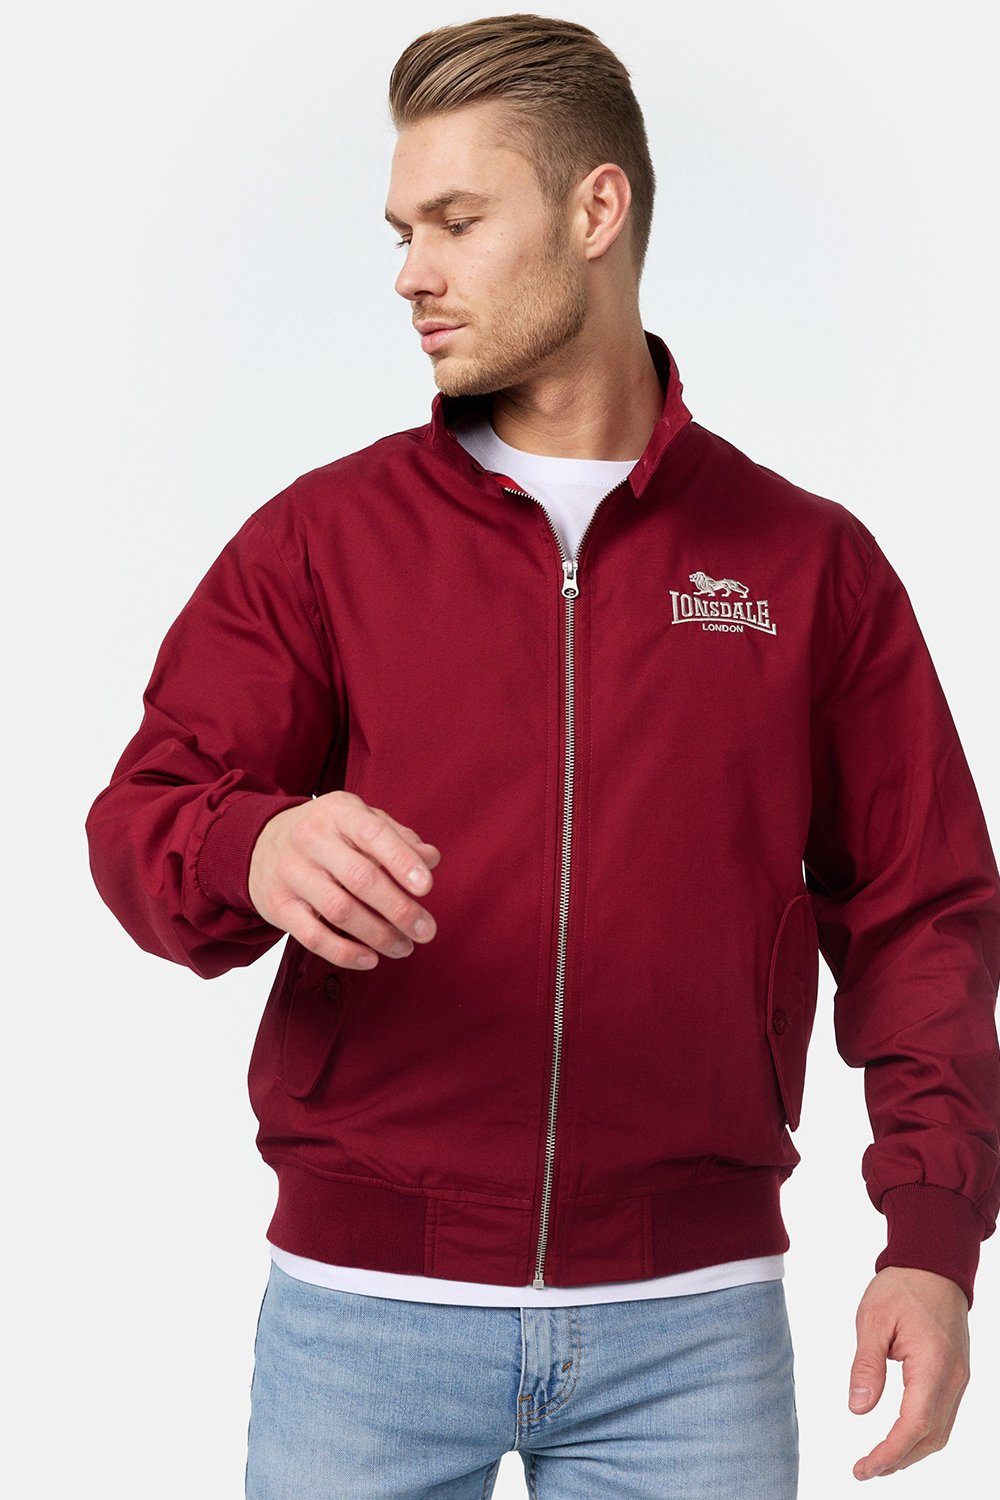 CLASSIC Lonsdale Allwetterjacke Red Cherry